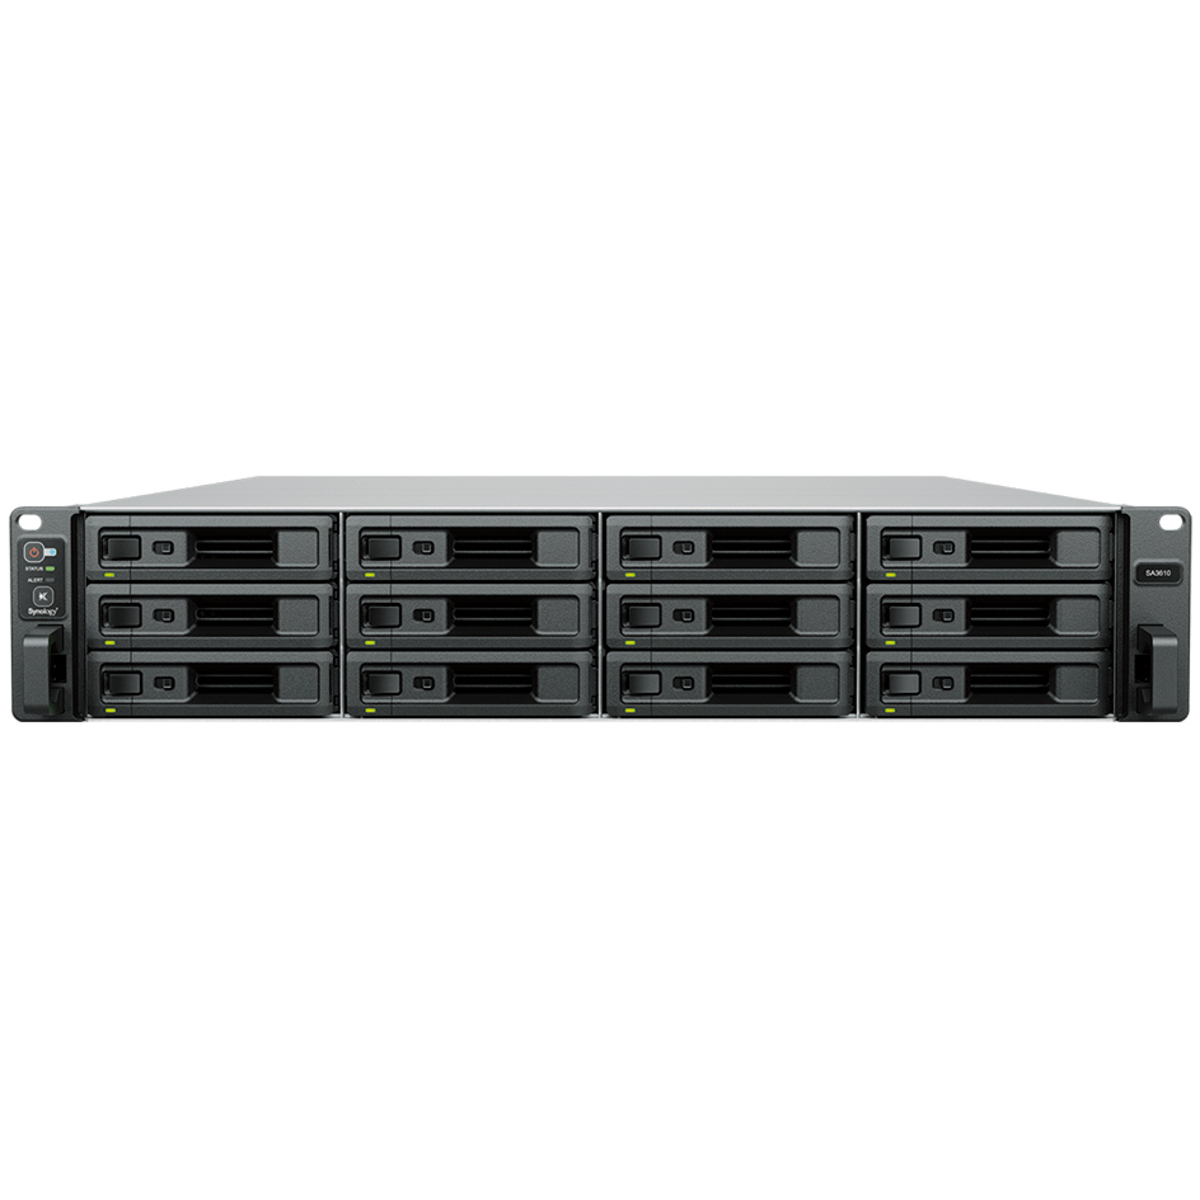 Synology RackStation SA3610 77tb 12-Bay RackMount Large Business / Enterprise NAS - Network Attached Storage Device 11x7tb Synology SAT5210 Series SAT5210-7000G 2.5 530/500MB/s SATA 6Gb/s SSD ENTERPRISE Class Drives Installed - Burn-In Tested RackStation SA3610